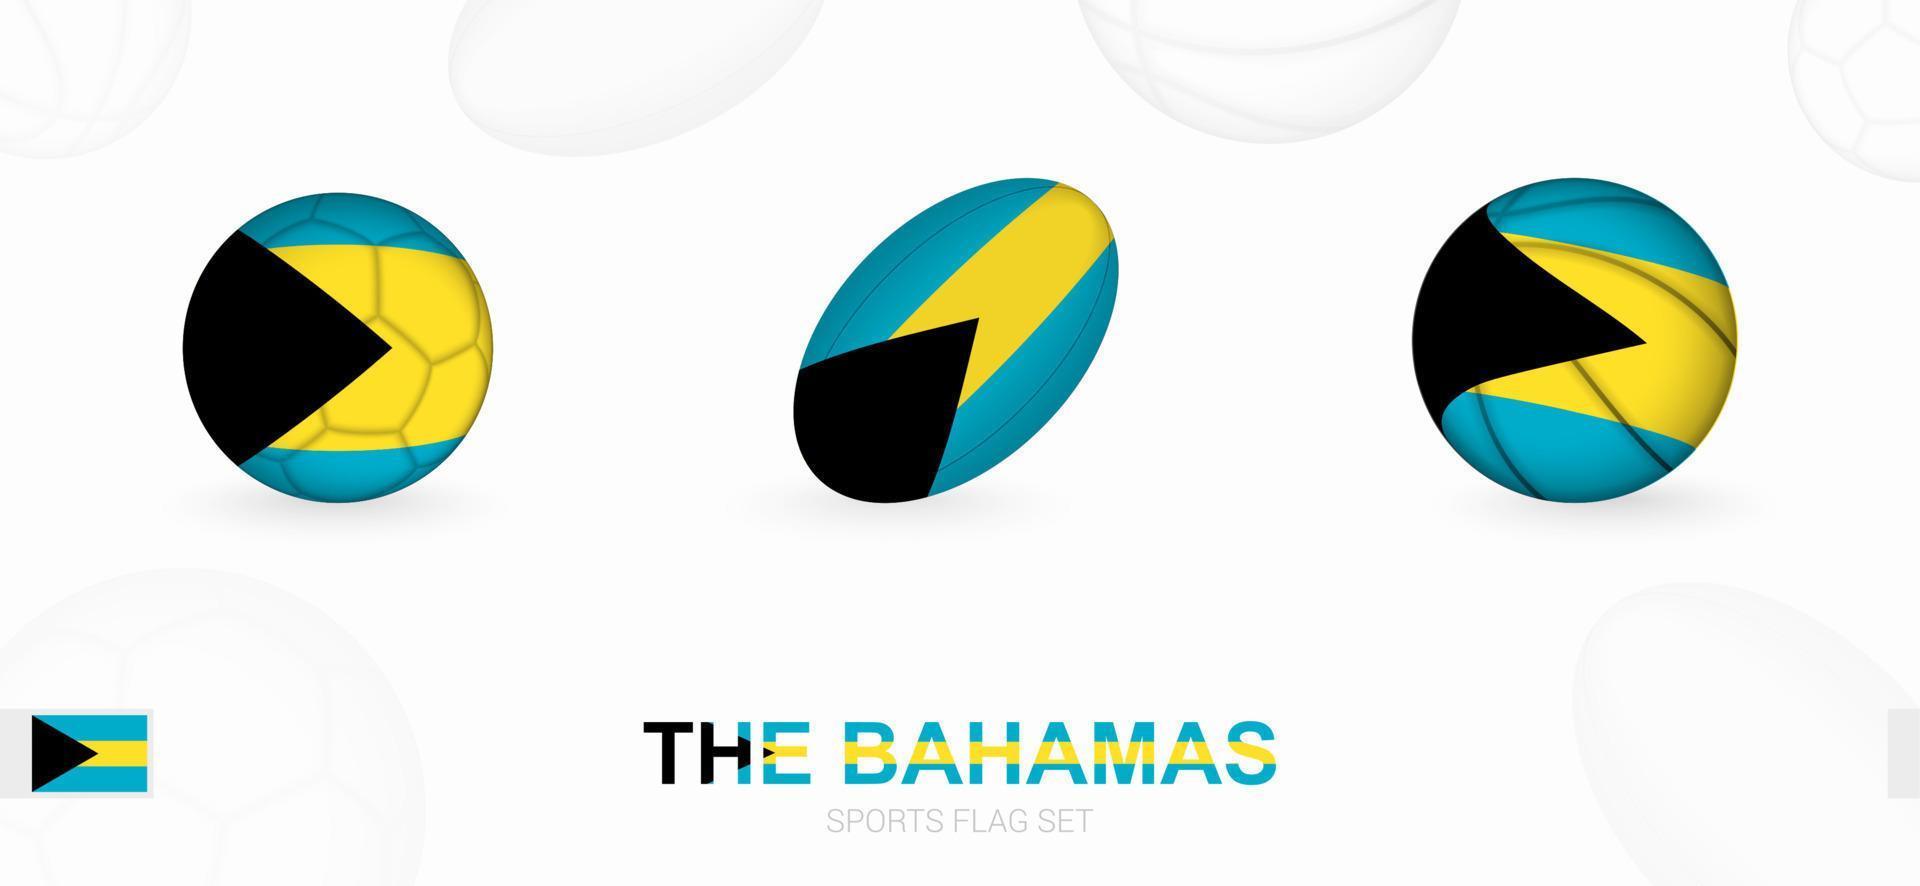 Sports icons for football, rugby and basketball with the flag of The Bahamas. vector